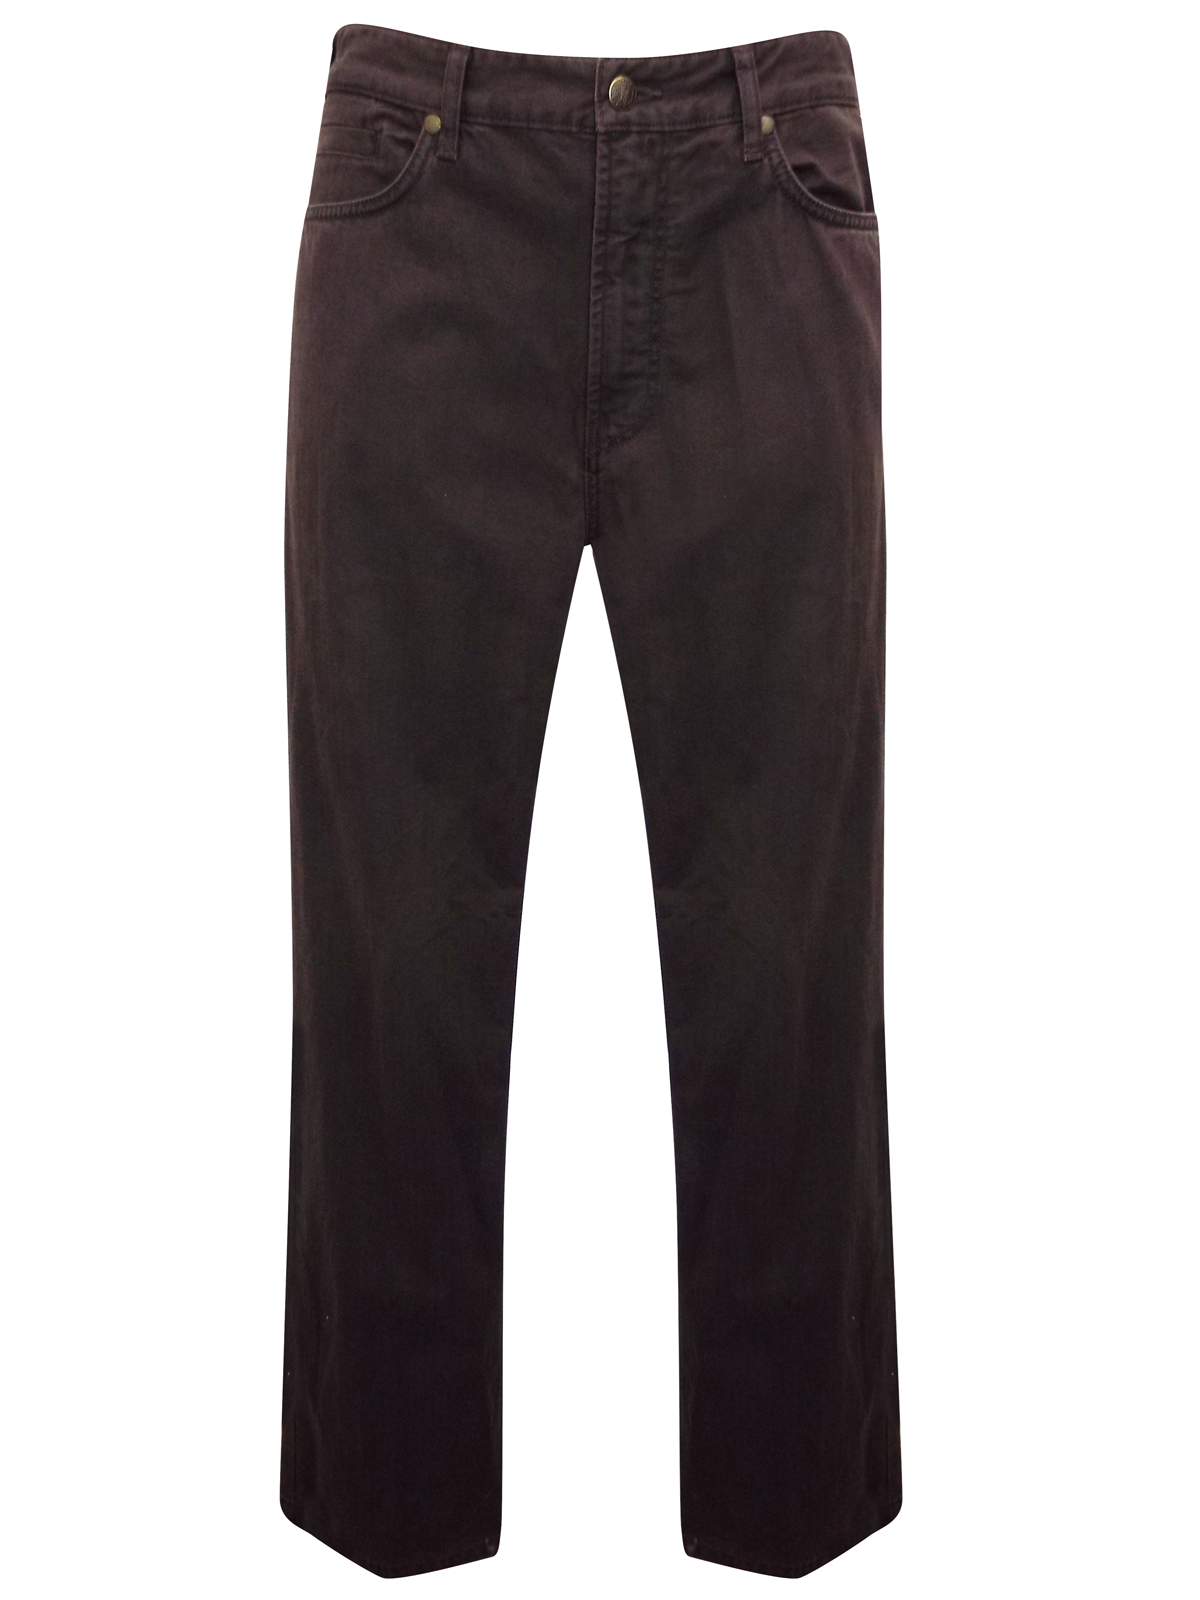 Marks and Spencer - - M&5 CHOCOLATE Cotton Rich Straight Leg Trousers ...